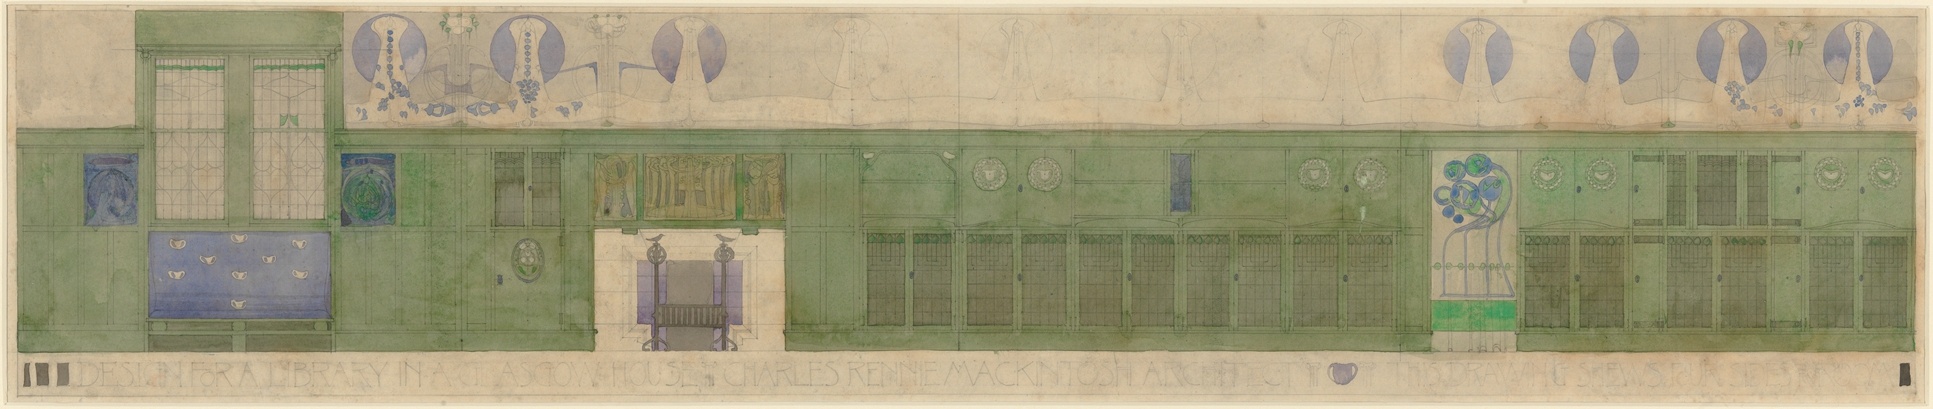 Charles Rennie Mackintosh. Design for a Library in a Glasgow House. ca 1894–96